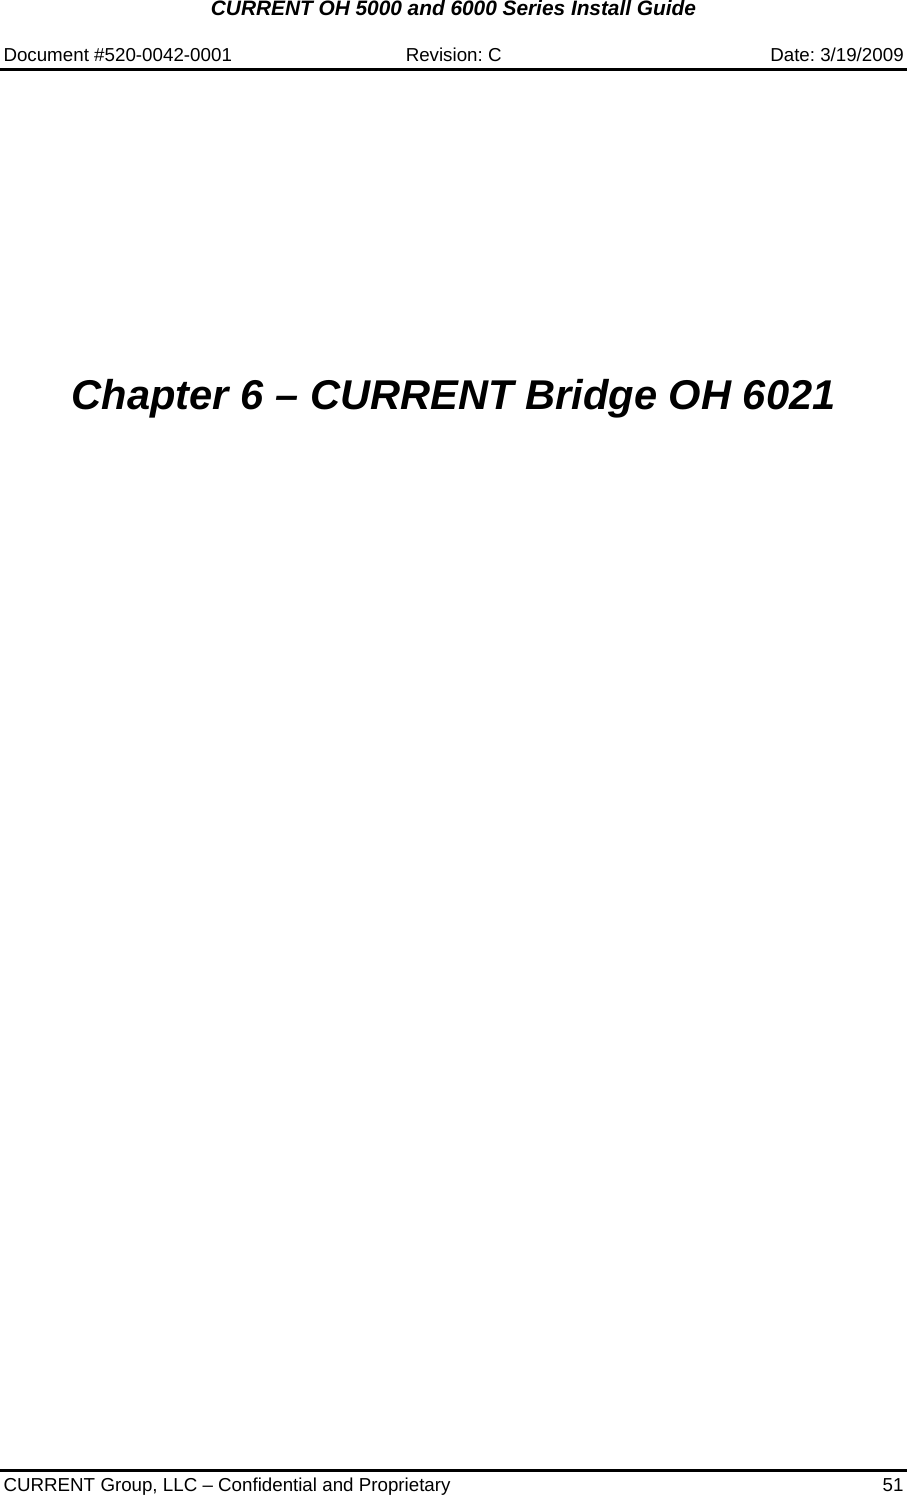 CURRENT OH 5000 and 6000 Series Install Guide  Document #520-0042-0001  Revision: C  Date: 3/19/2009  CURRENT Group, LLC – Confidential and Proprietary  51            Chapter 6 – CURRENT Bridge OH 6021             